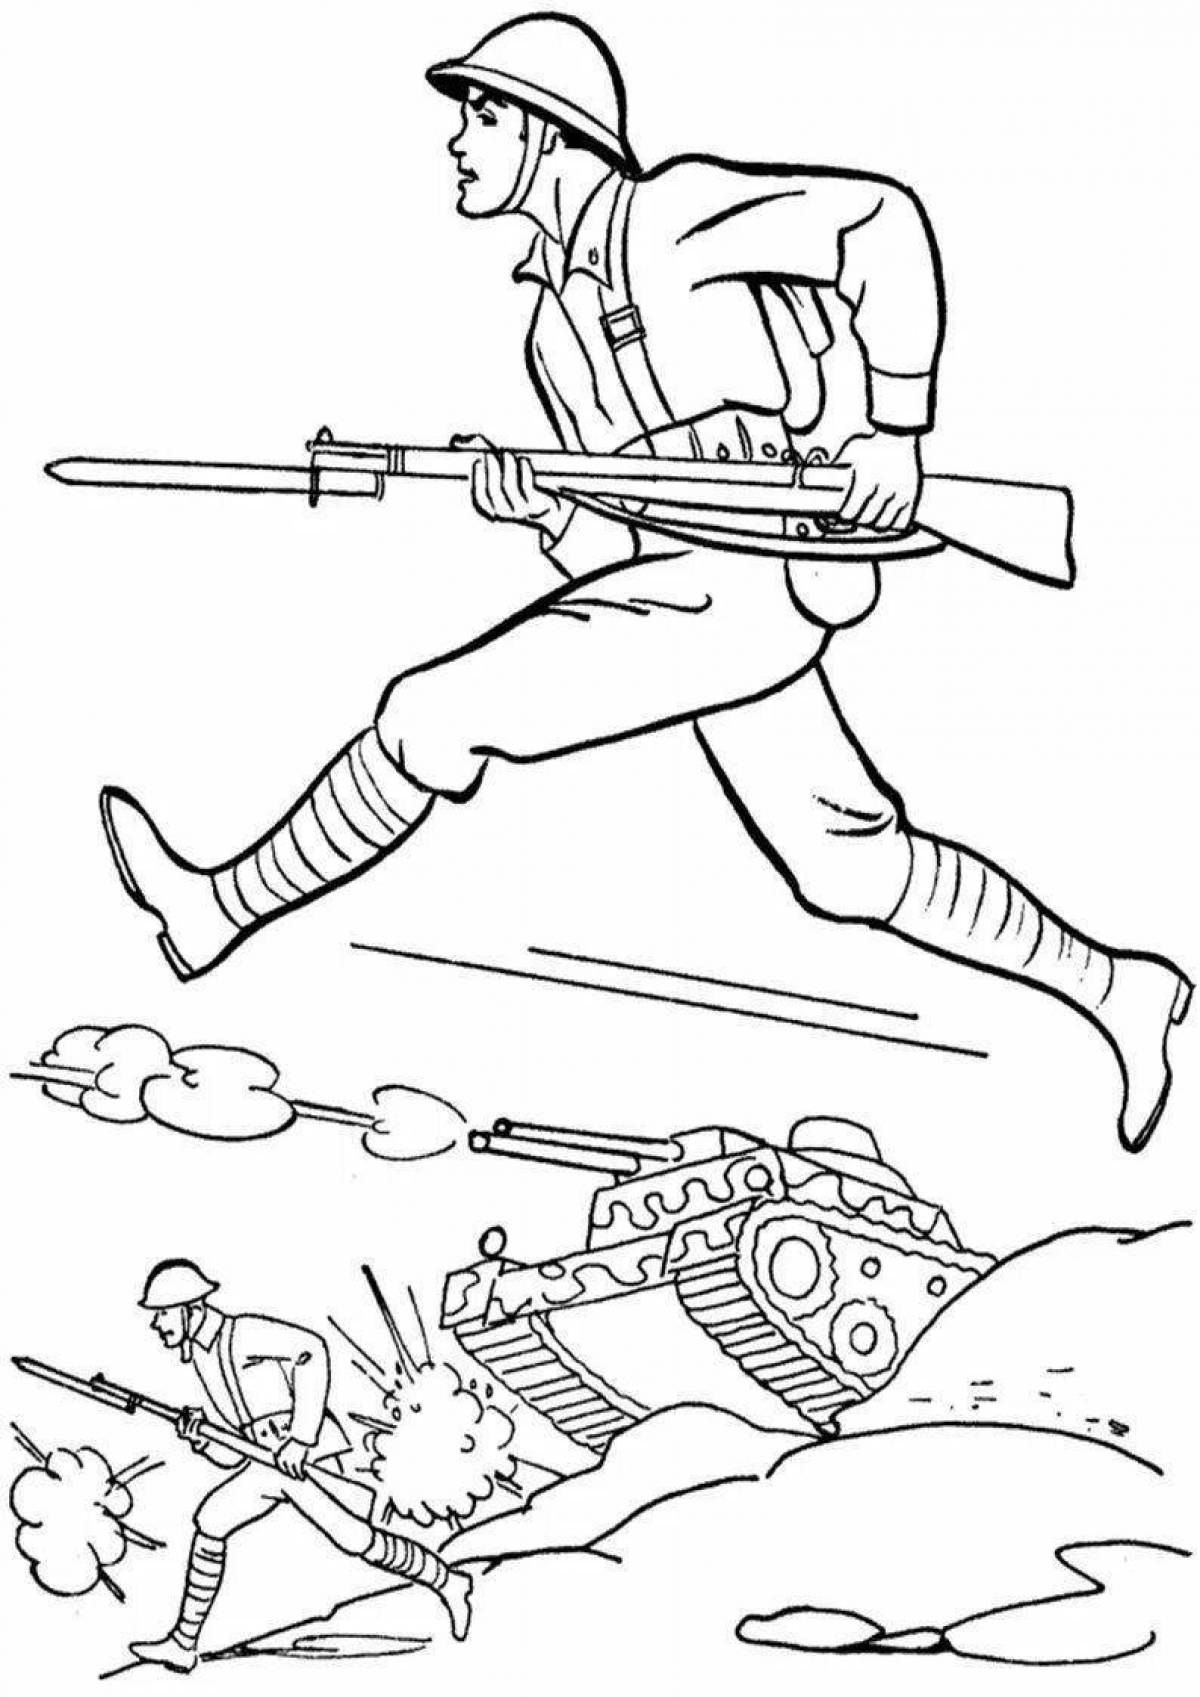 Detailed soldier coloring page